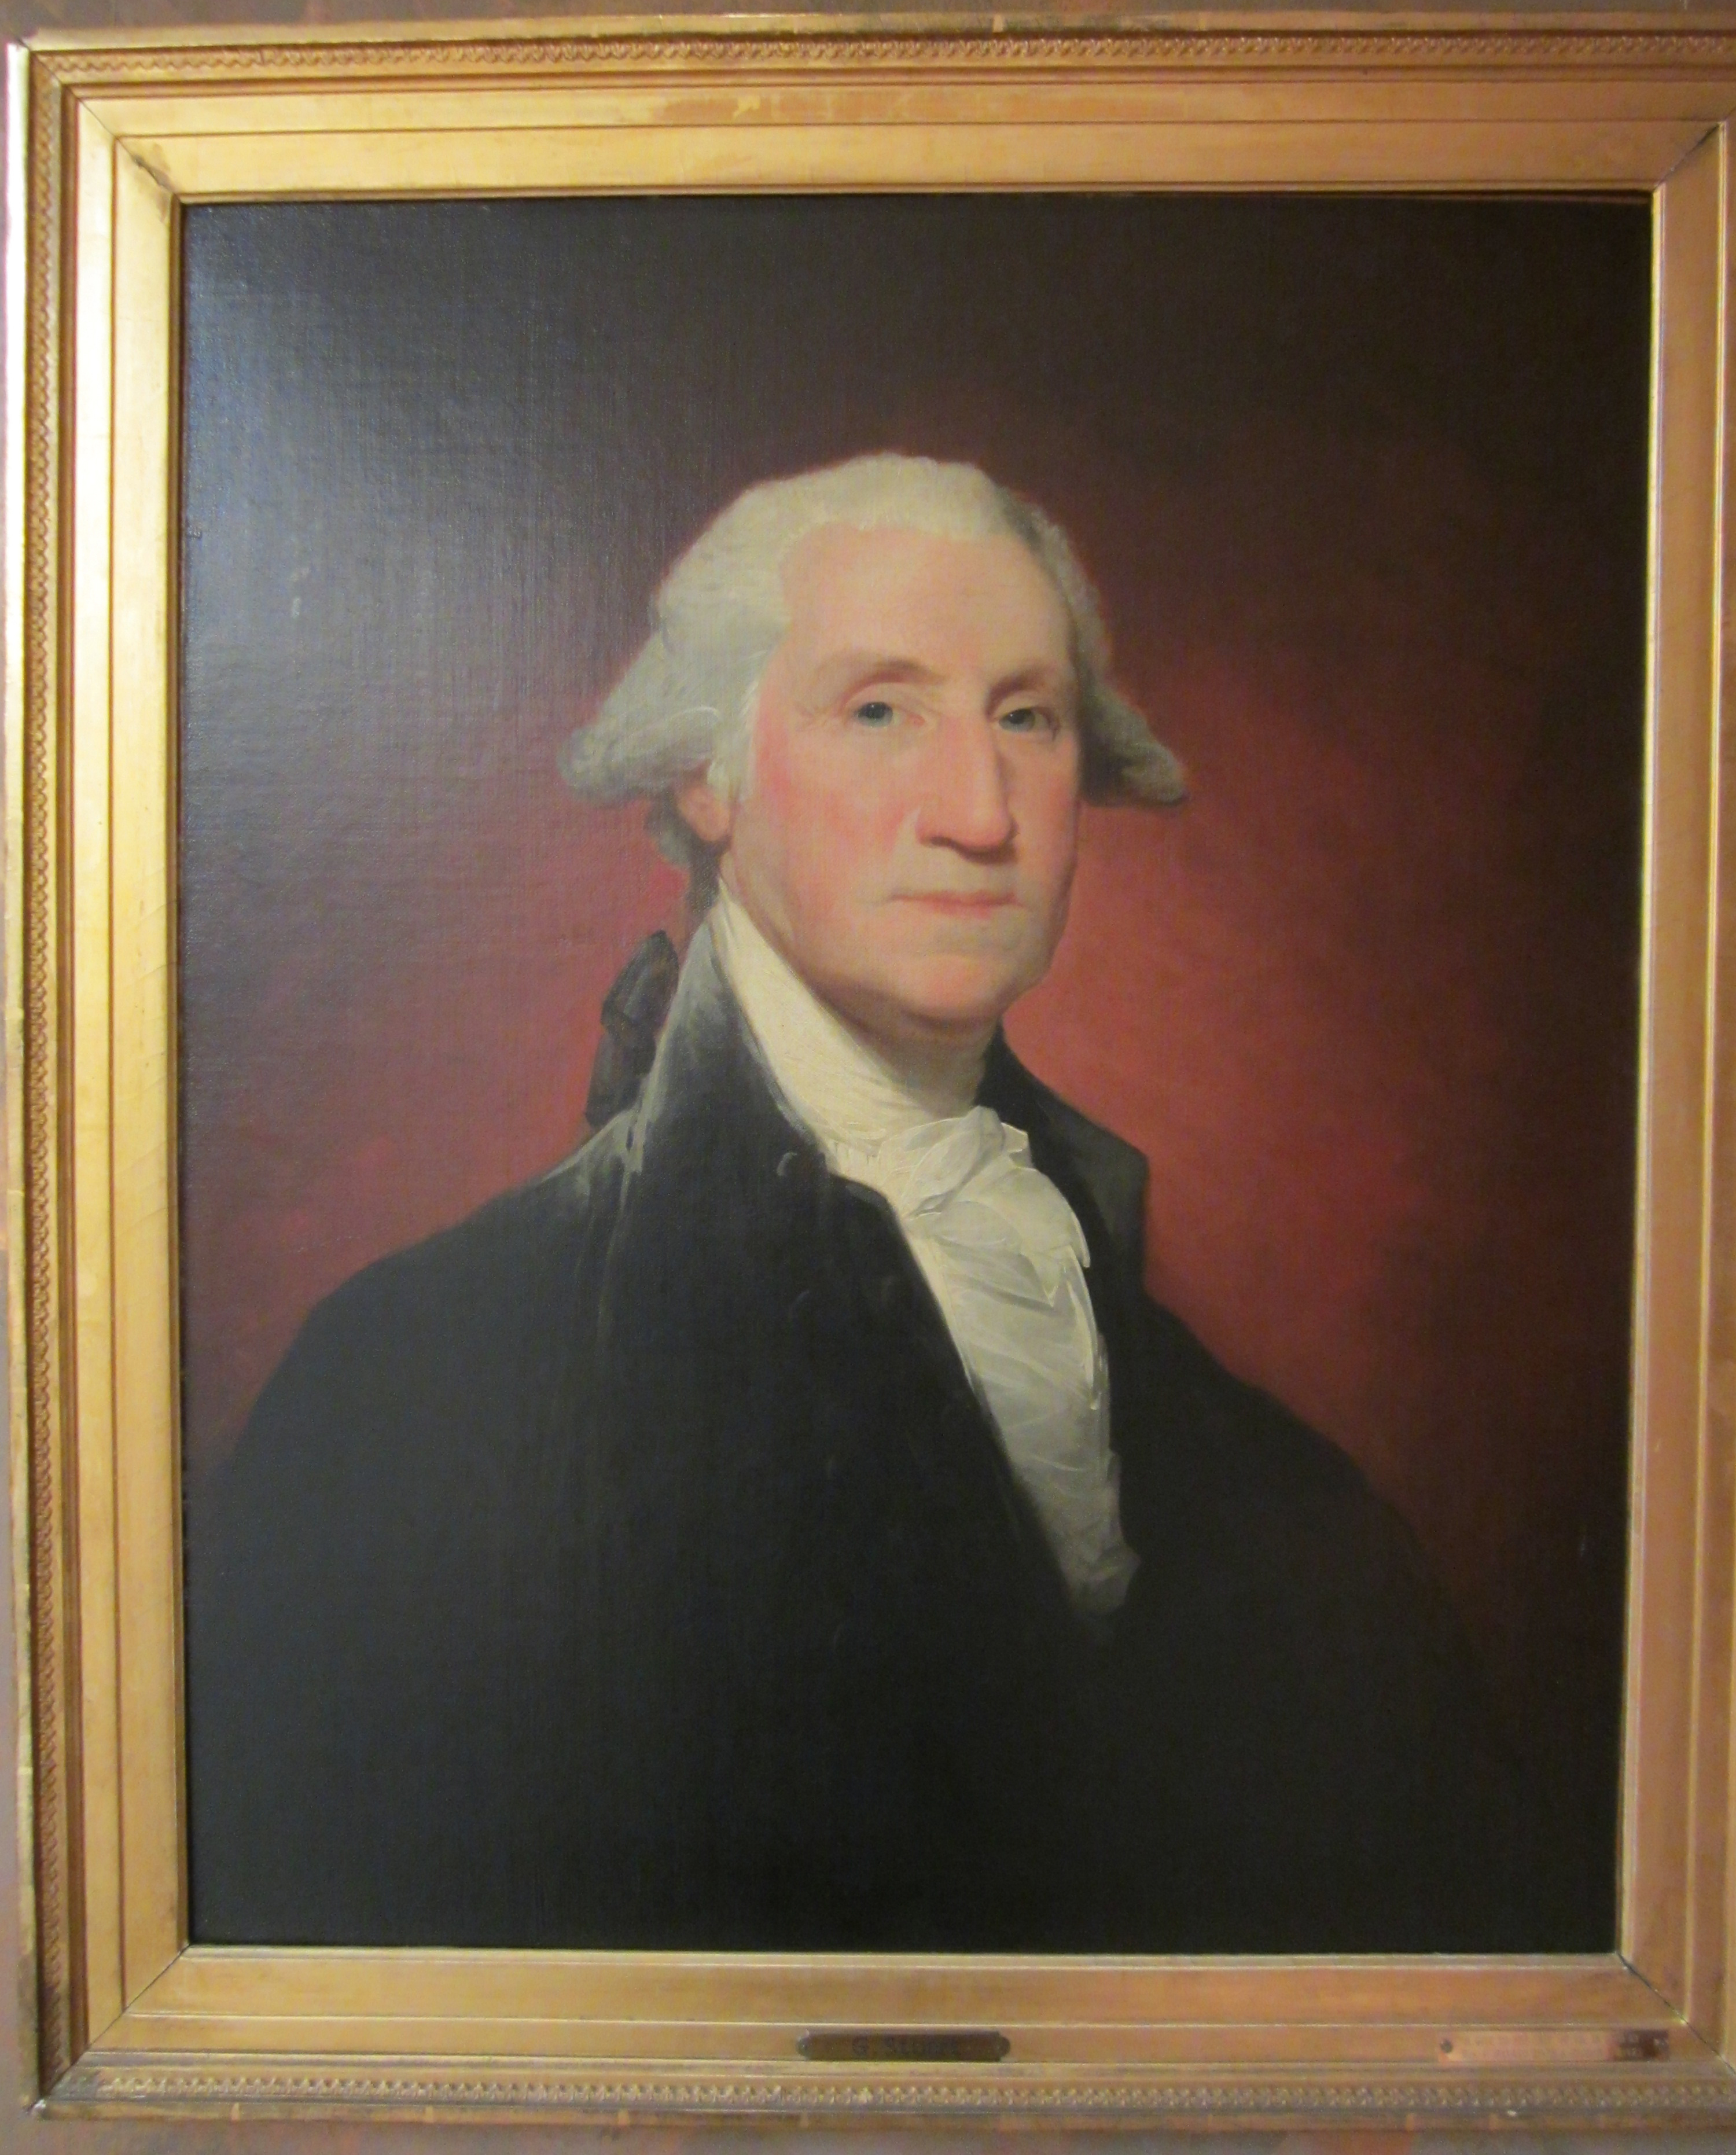 Portrait of George Washington by Gilbert Stuart. (Gift of Mrs. F. Bayard Rives and George L. Rives. Photograph by Donna Stapley.)